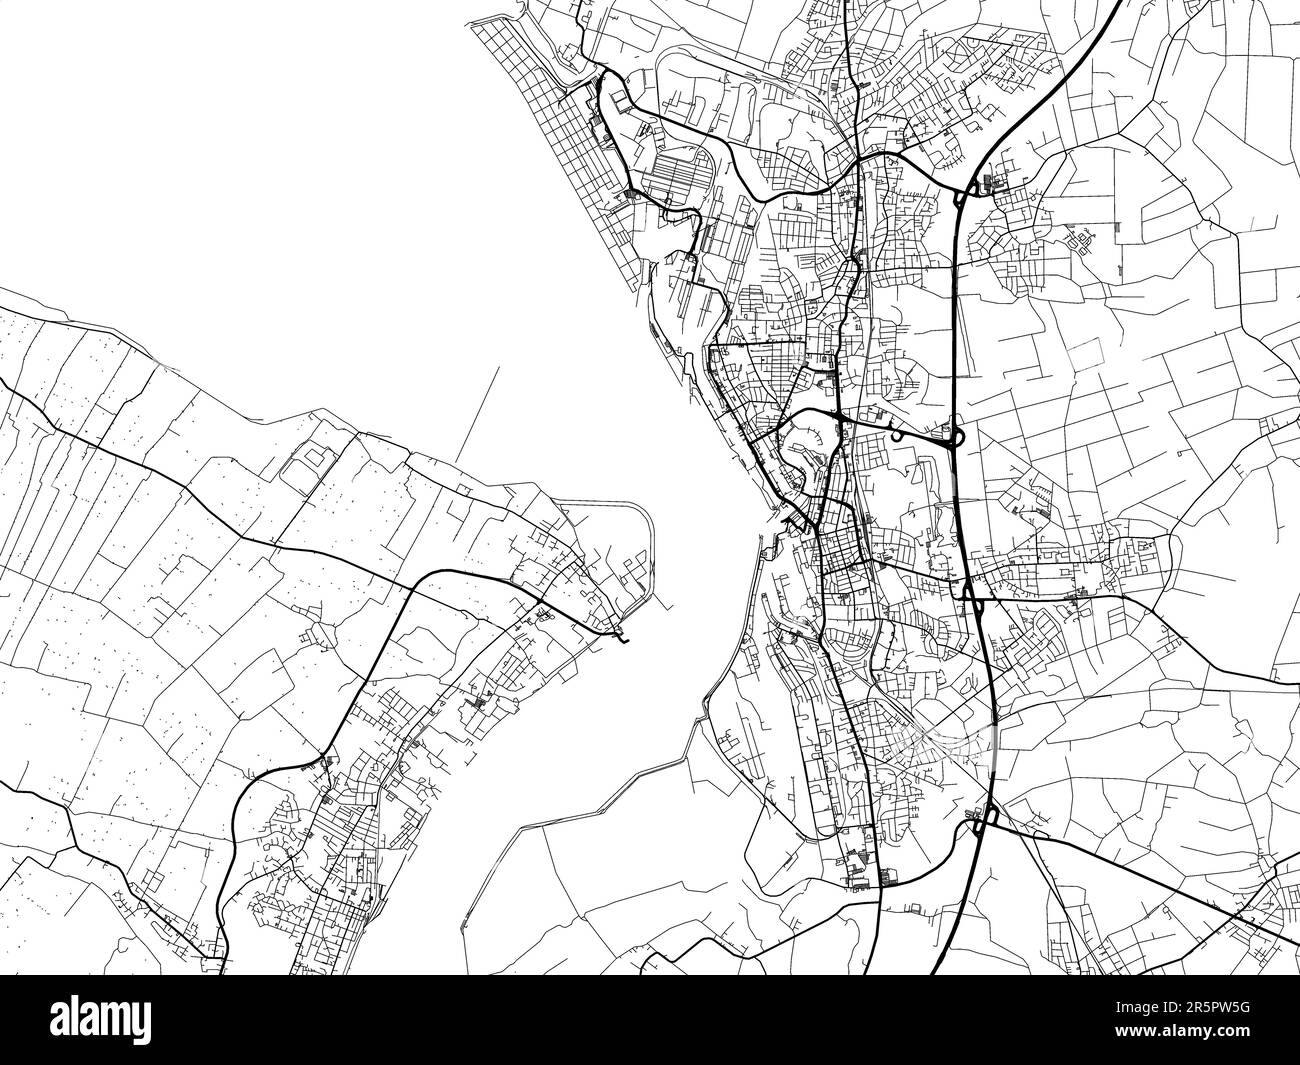 Vector road map of the city of Bremerhaven in Germany on a white ...